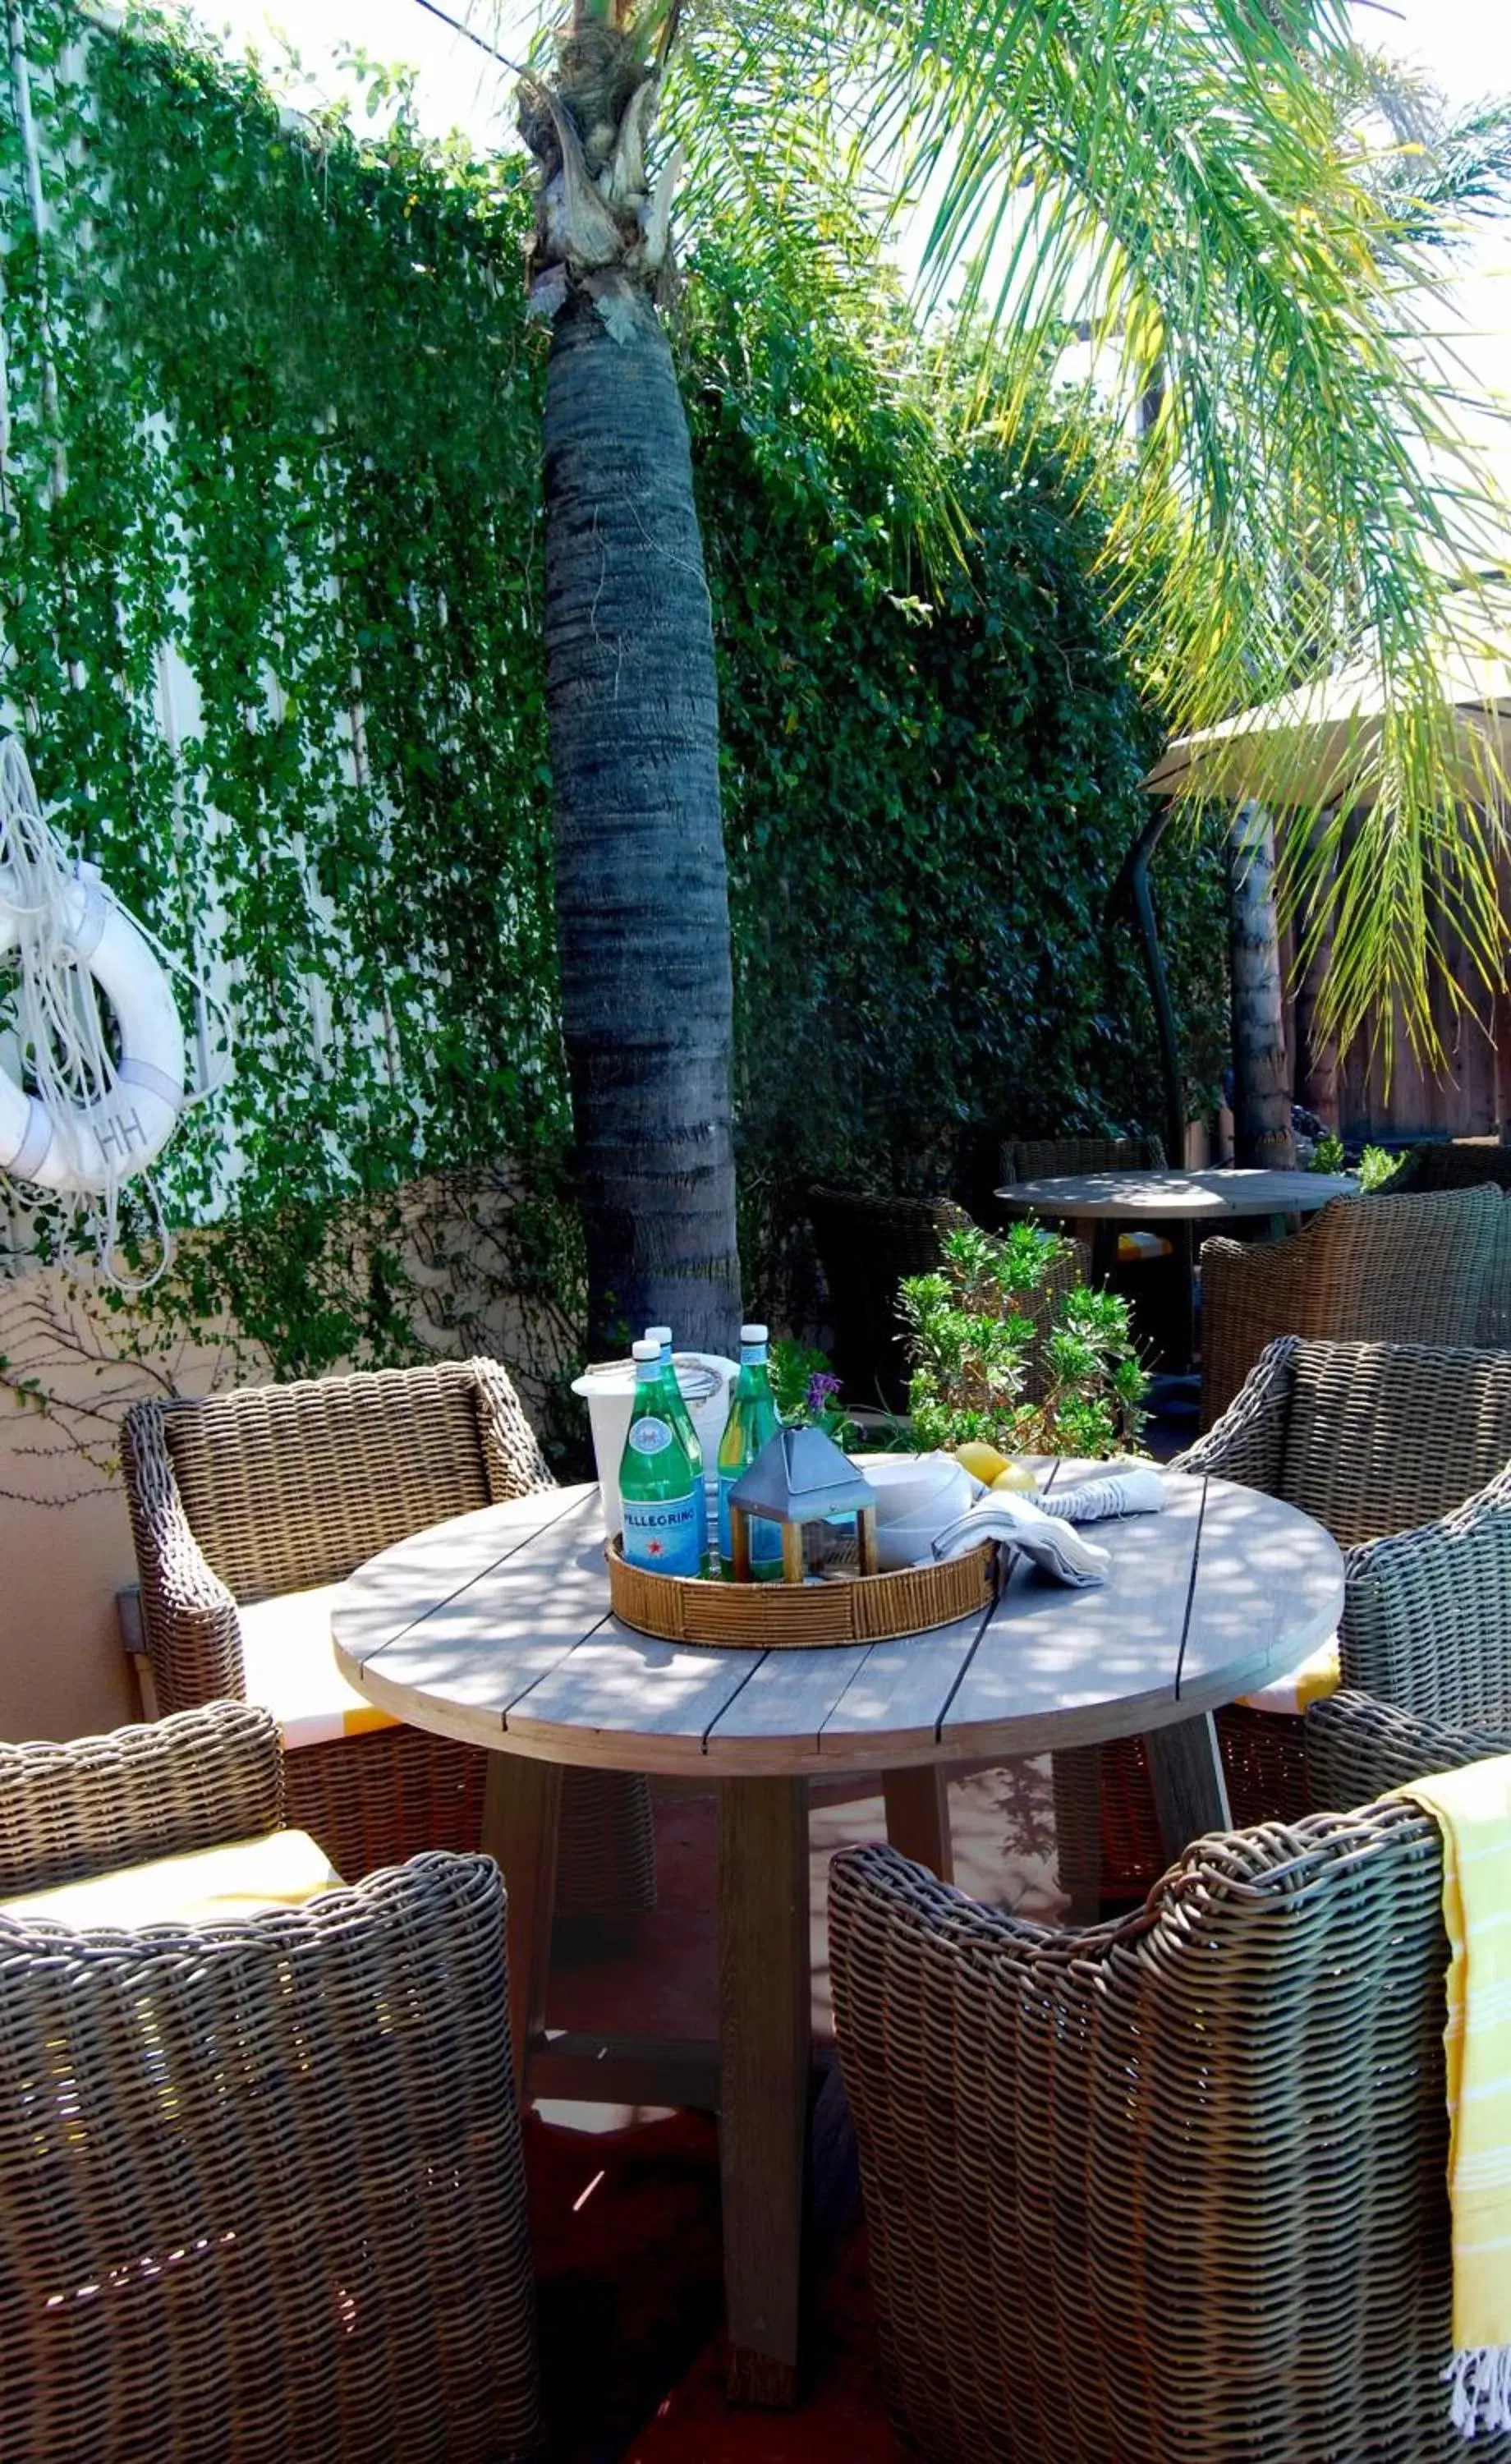 Garden, Patio/Outdoor Area in Hollywood Hotel - The Hotel of Hollywood Near Universal Studios